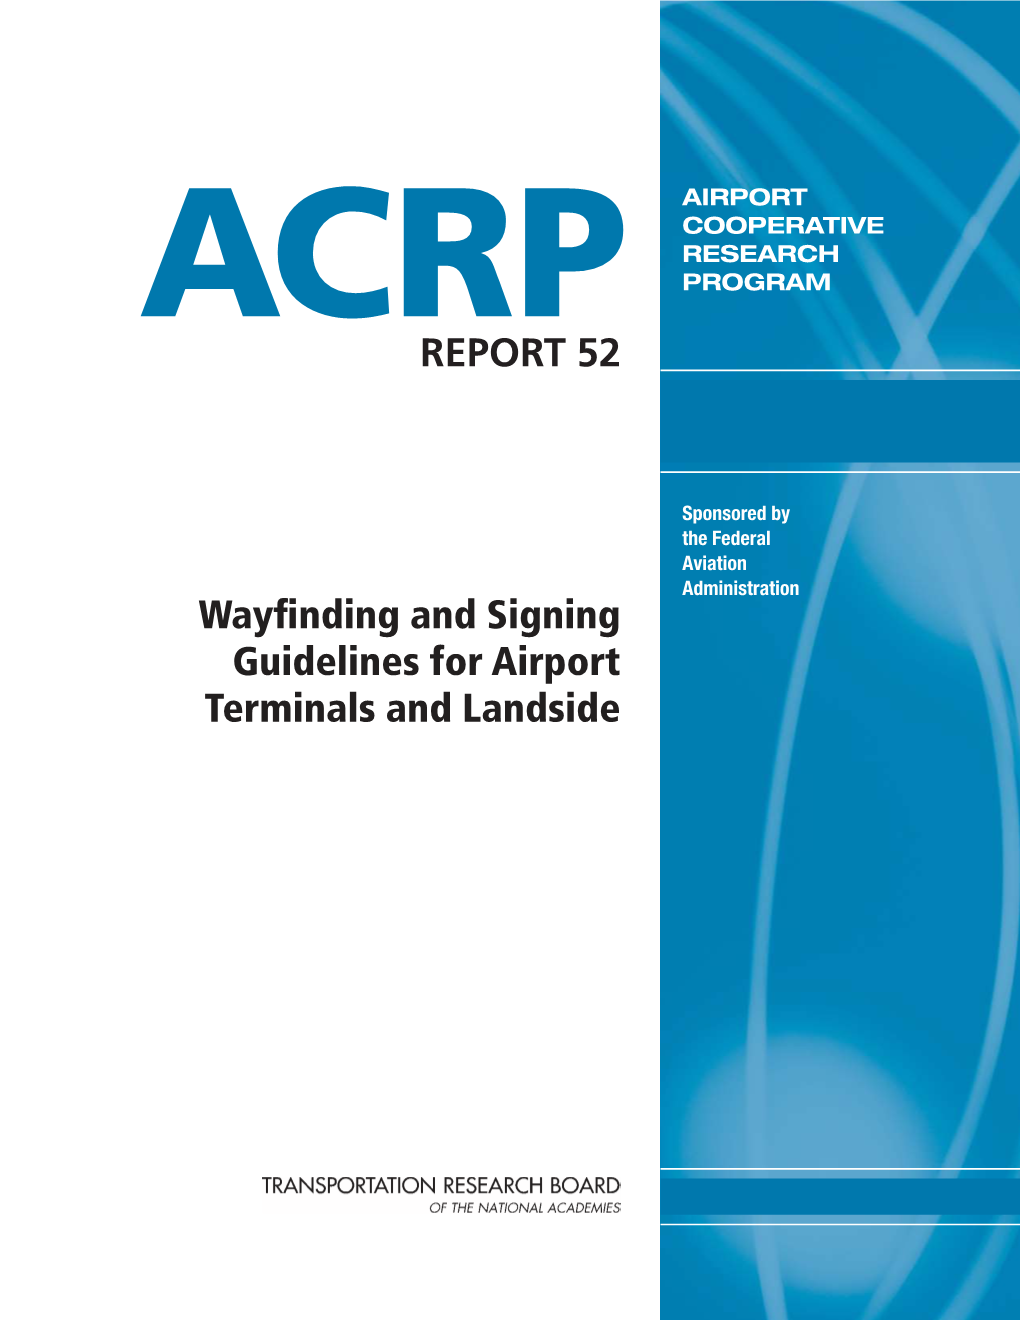 Wayfinding and Signing Guidelines for Airport Terminals And